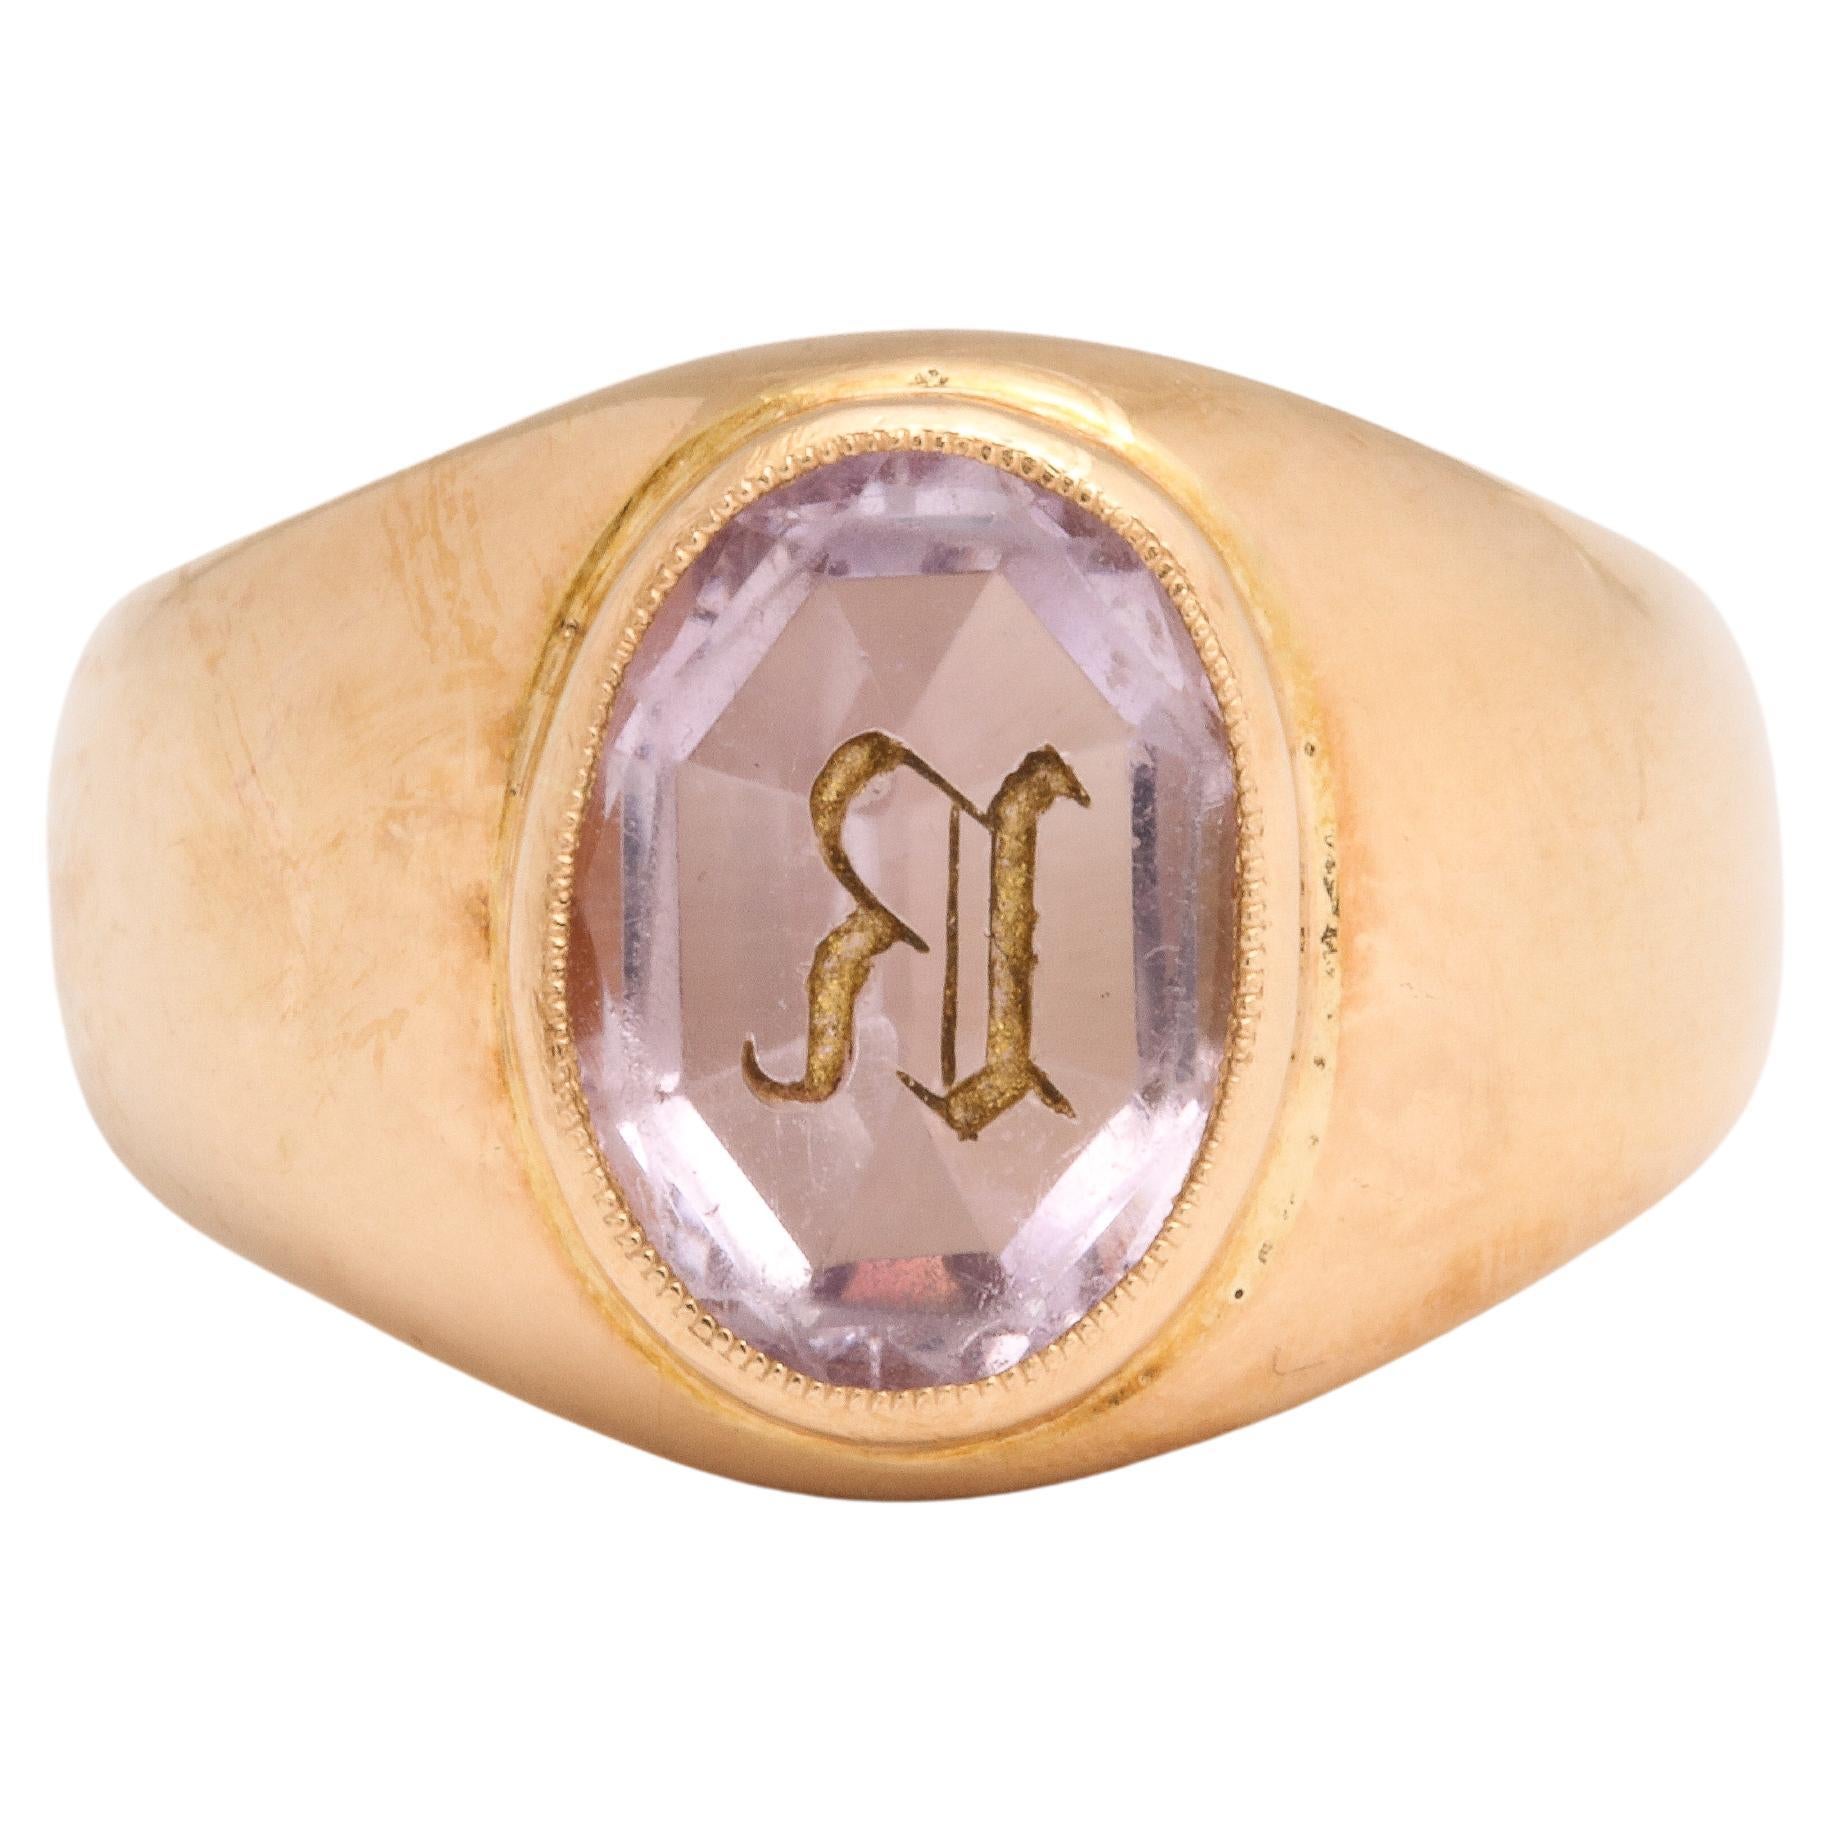 A pastel faceted amethyst is the central point of this French Victorian Gold Signet Ring and the reason it is so attractive. Rather than overshadow the rich gold it adds a flow of one to the other, a harmony. The gold is a rich buttery 18 kt. The